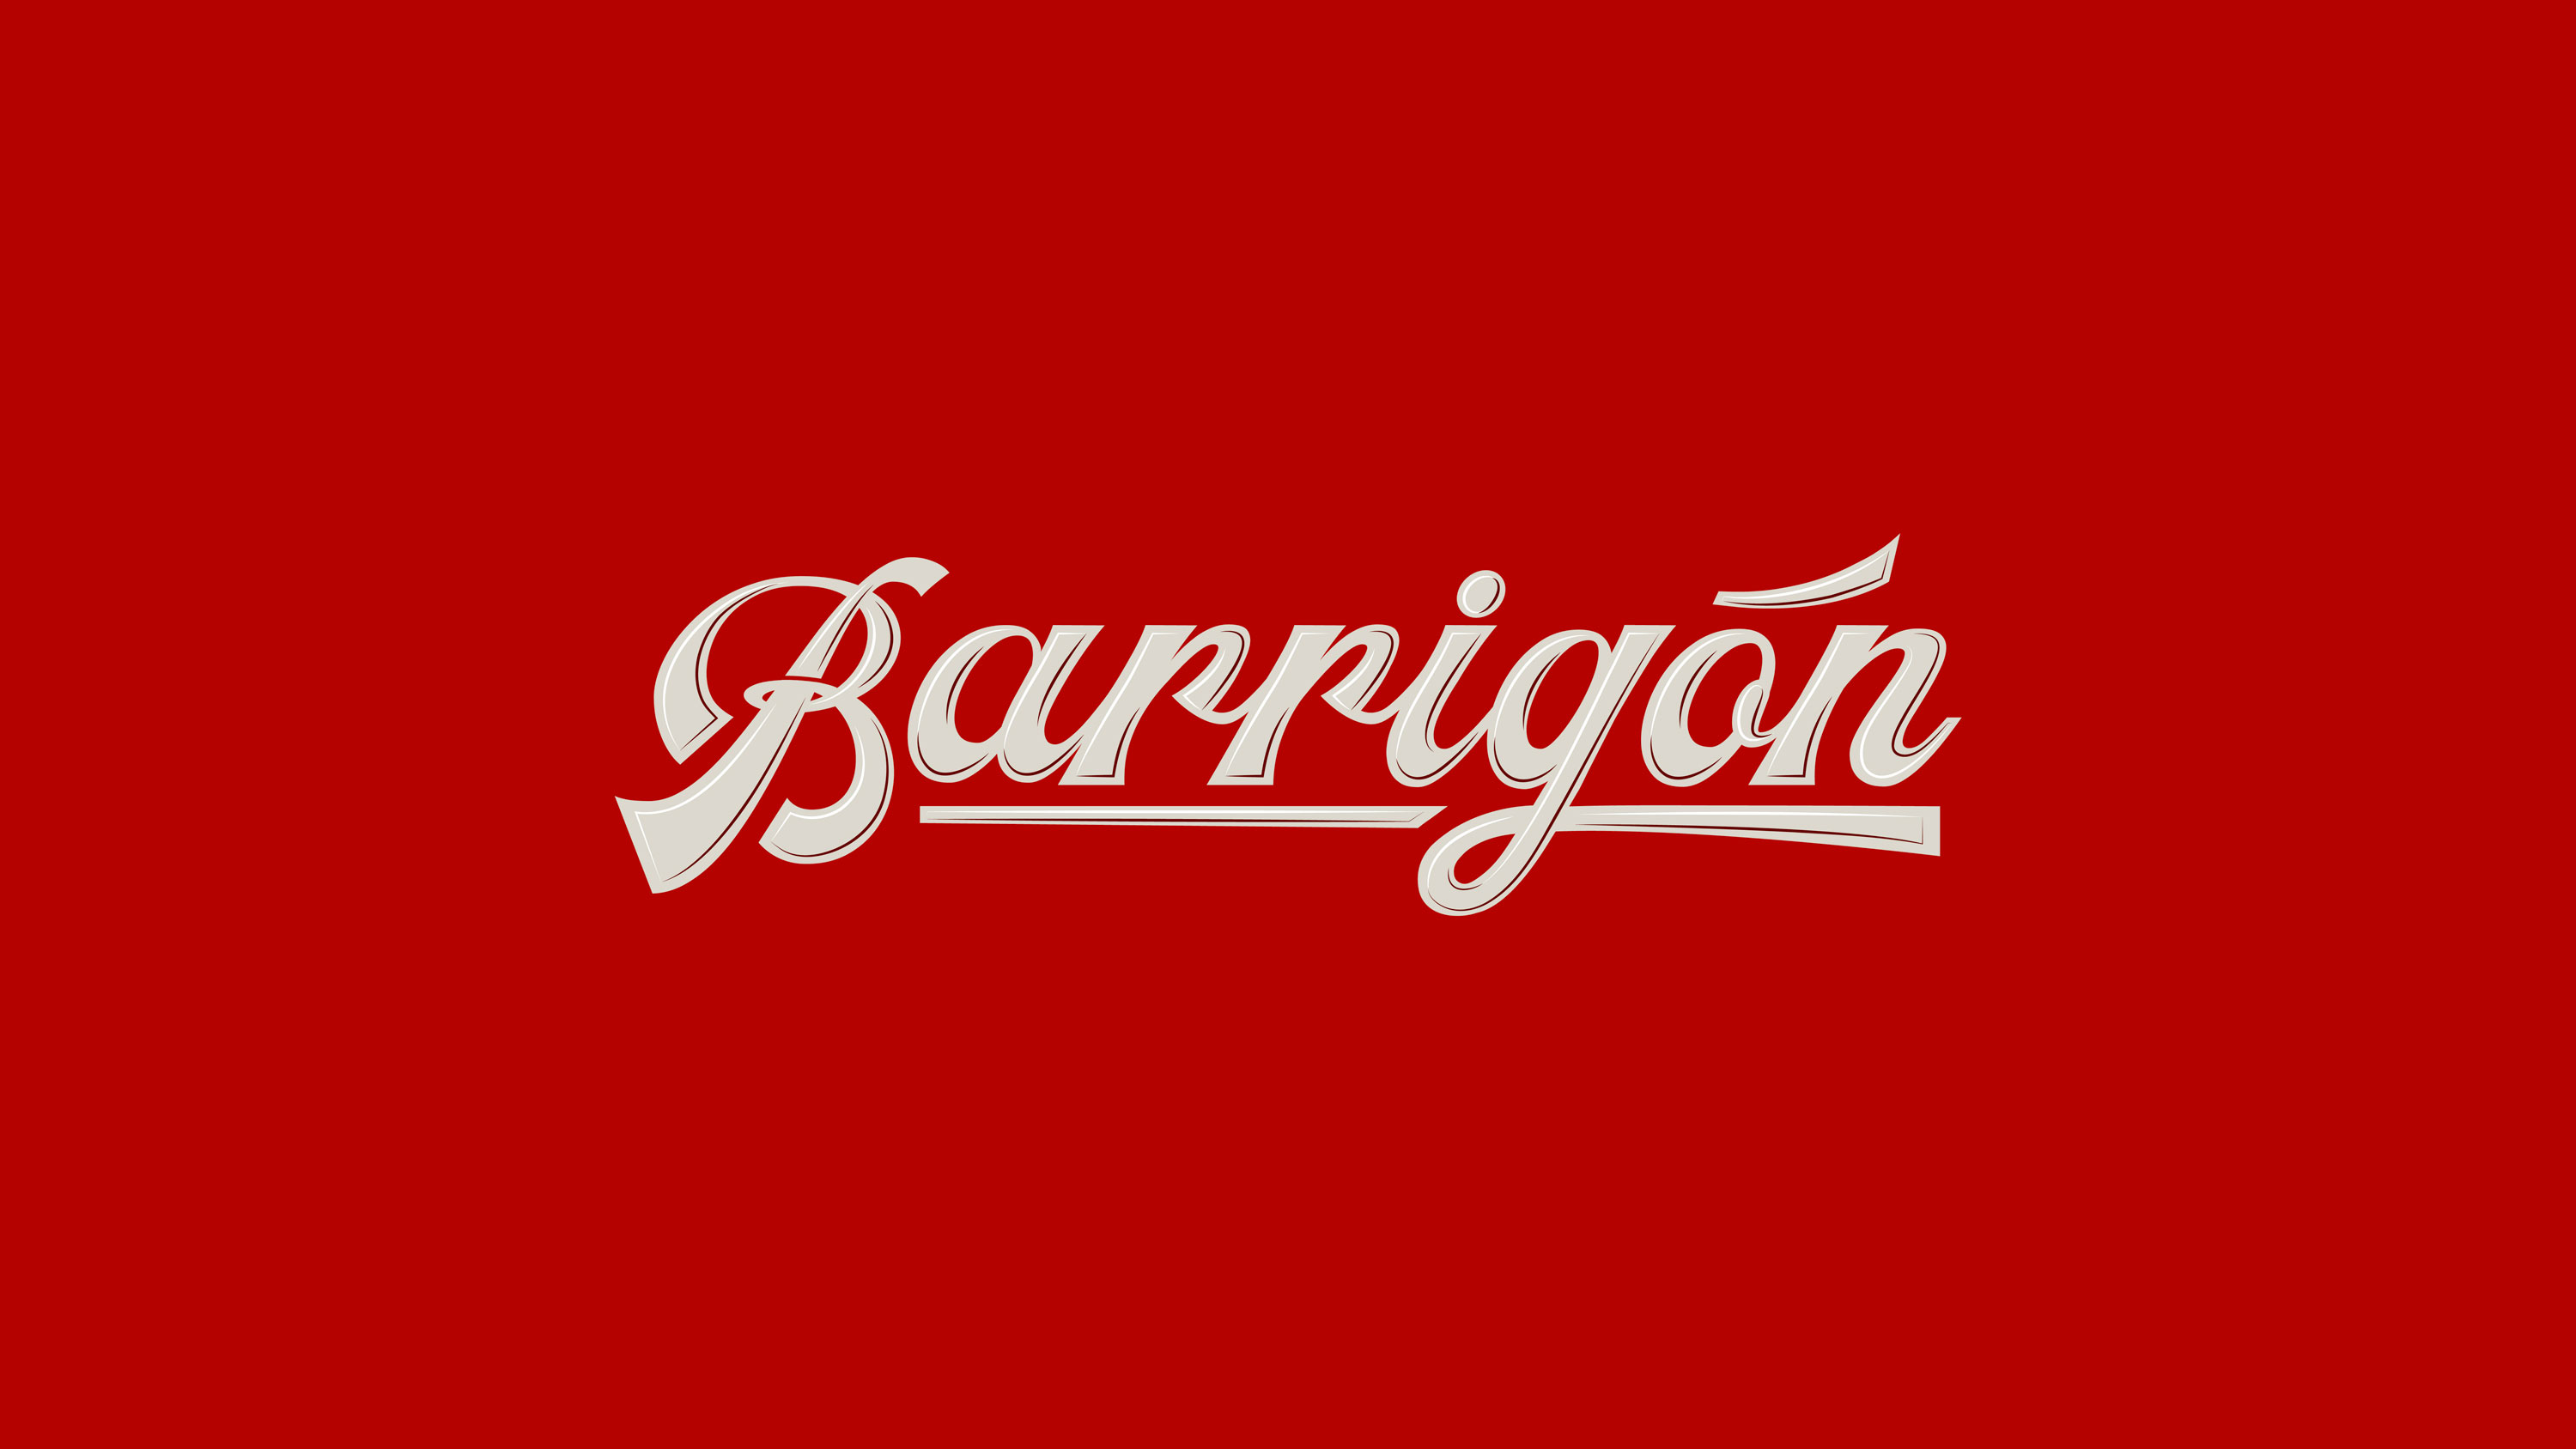 Barrigón Brand Identity Design by Cillgold Agency: A Blend of Classic Elegance and Modern